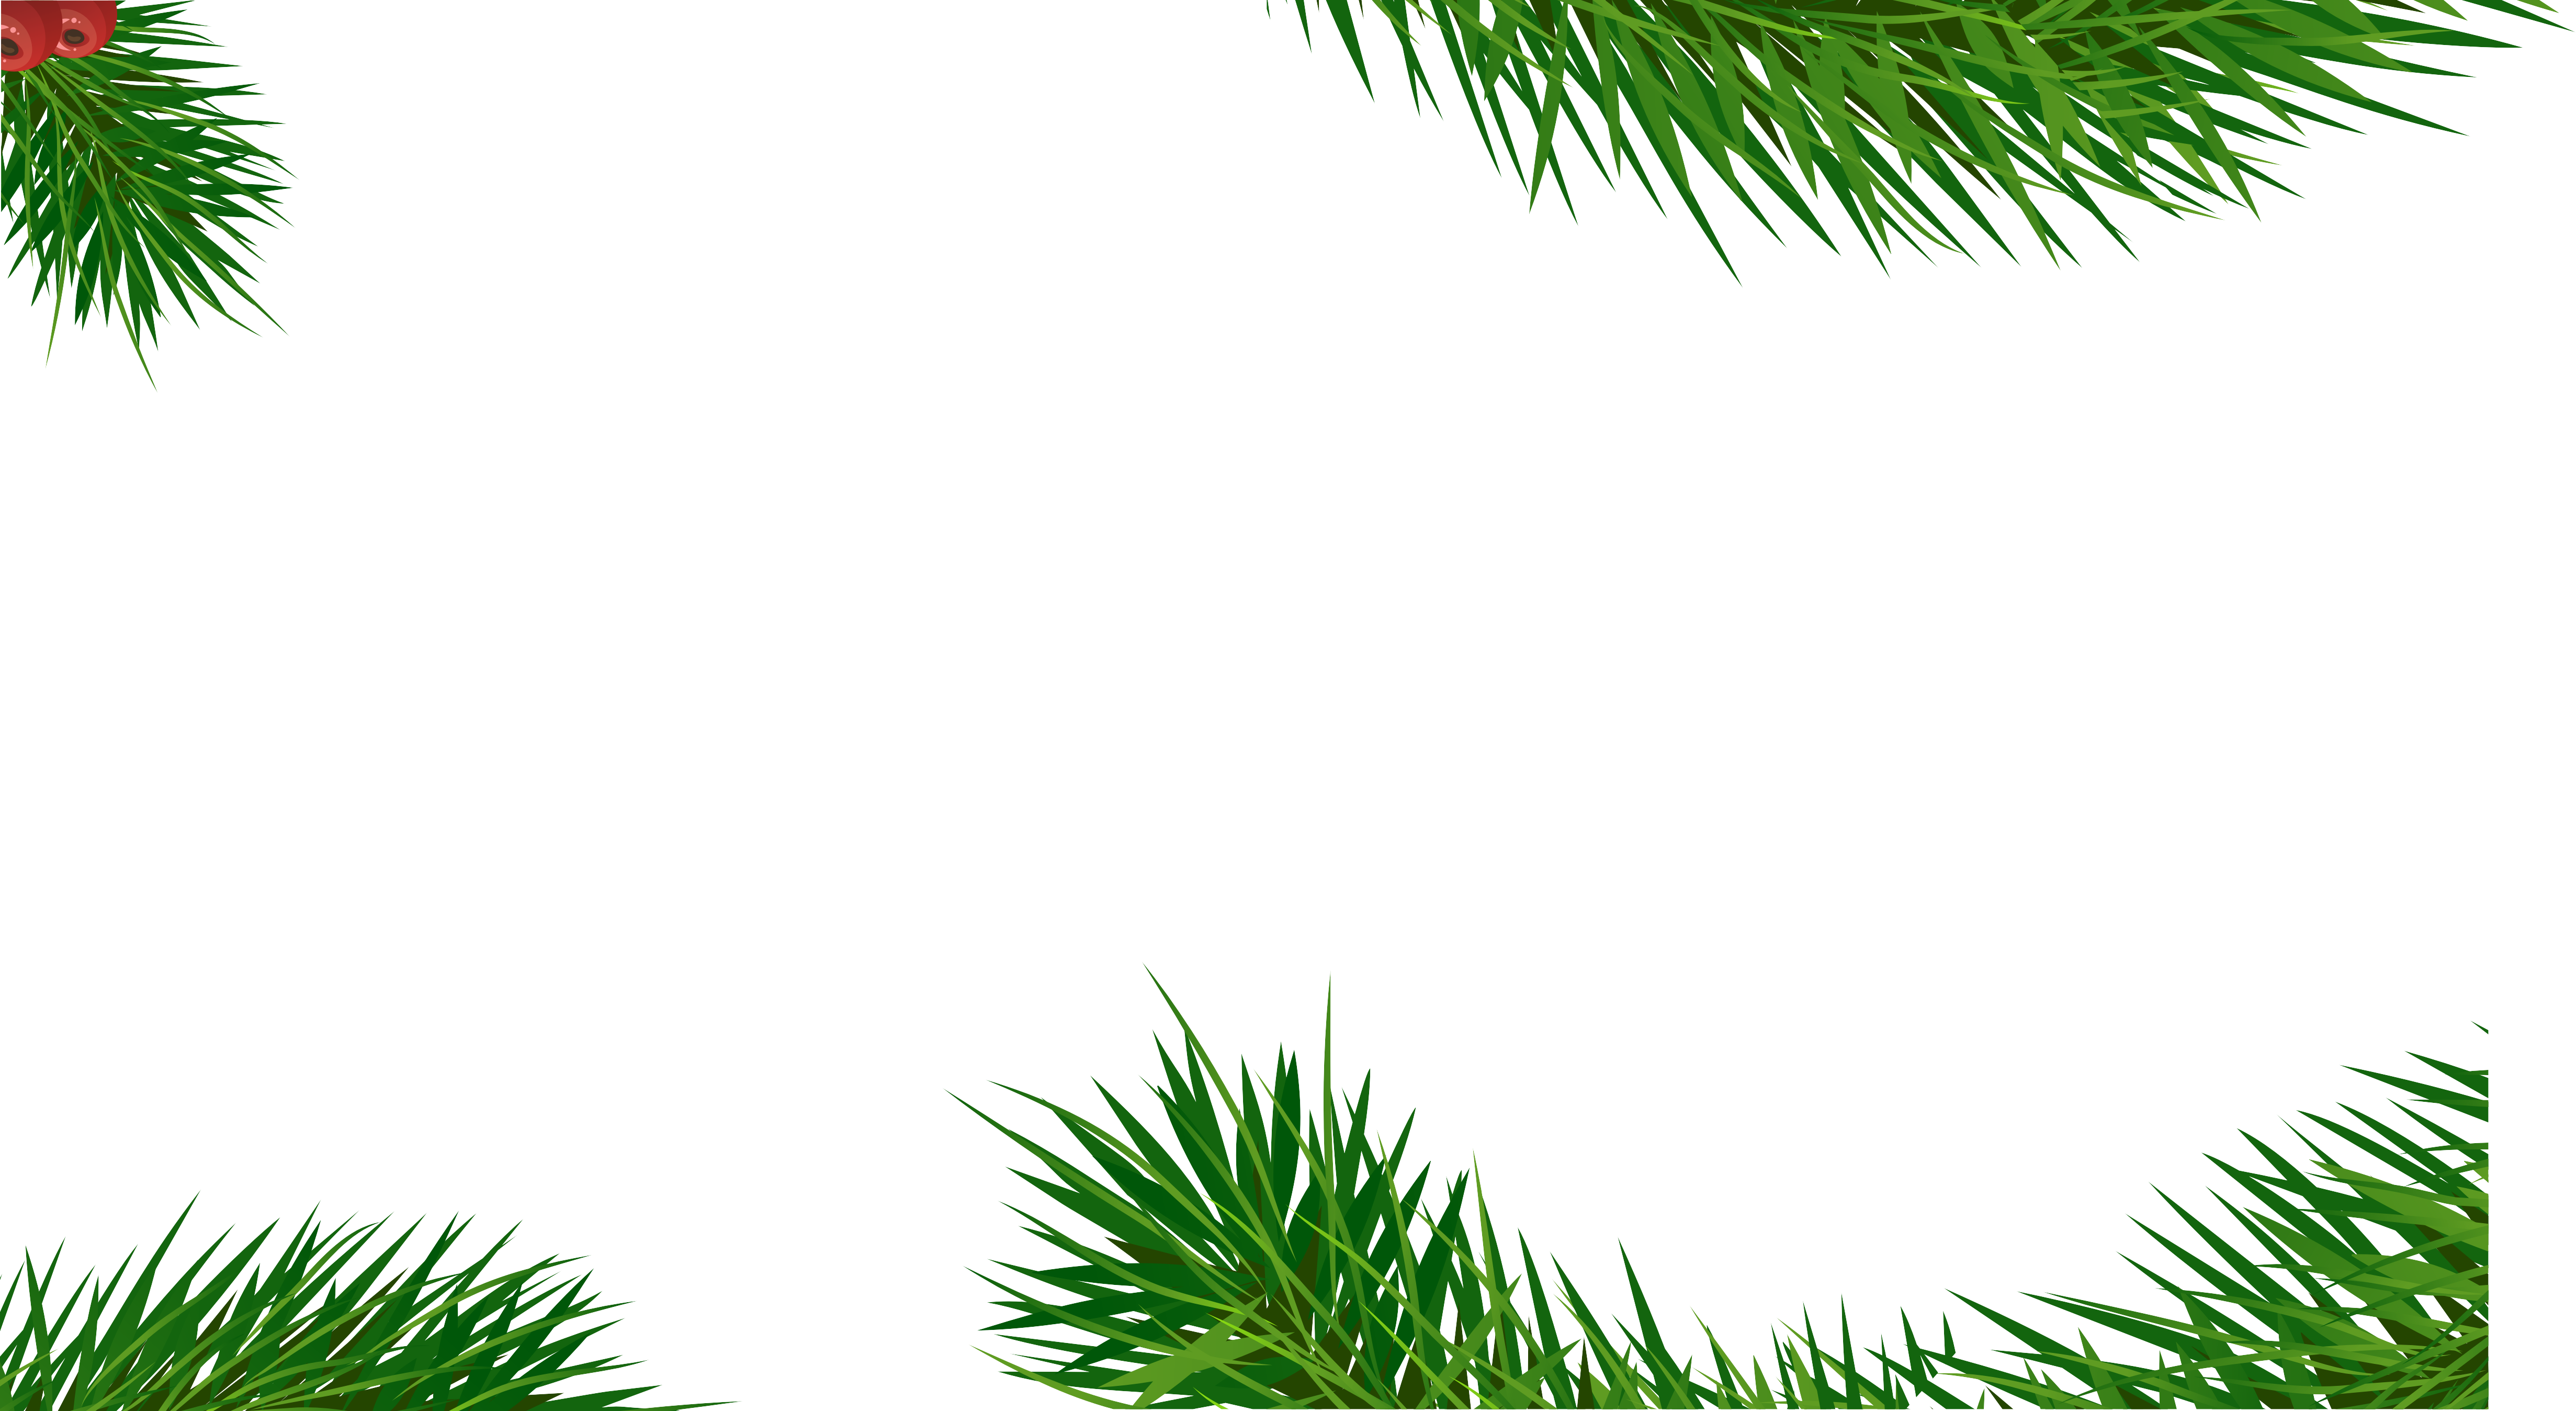 Green Grass Background Vector - Background Poster Green (4924x2697)